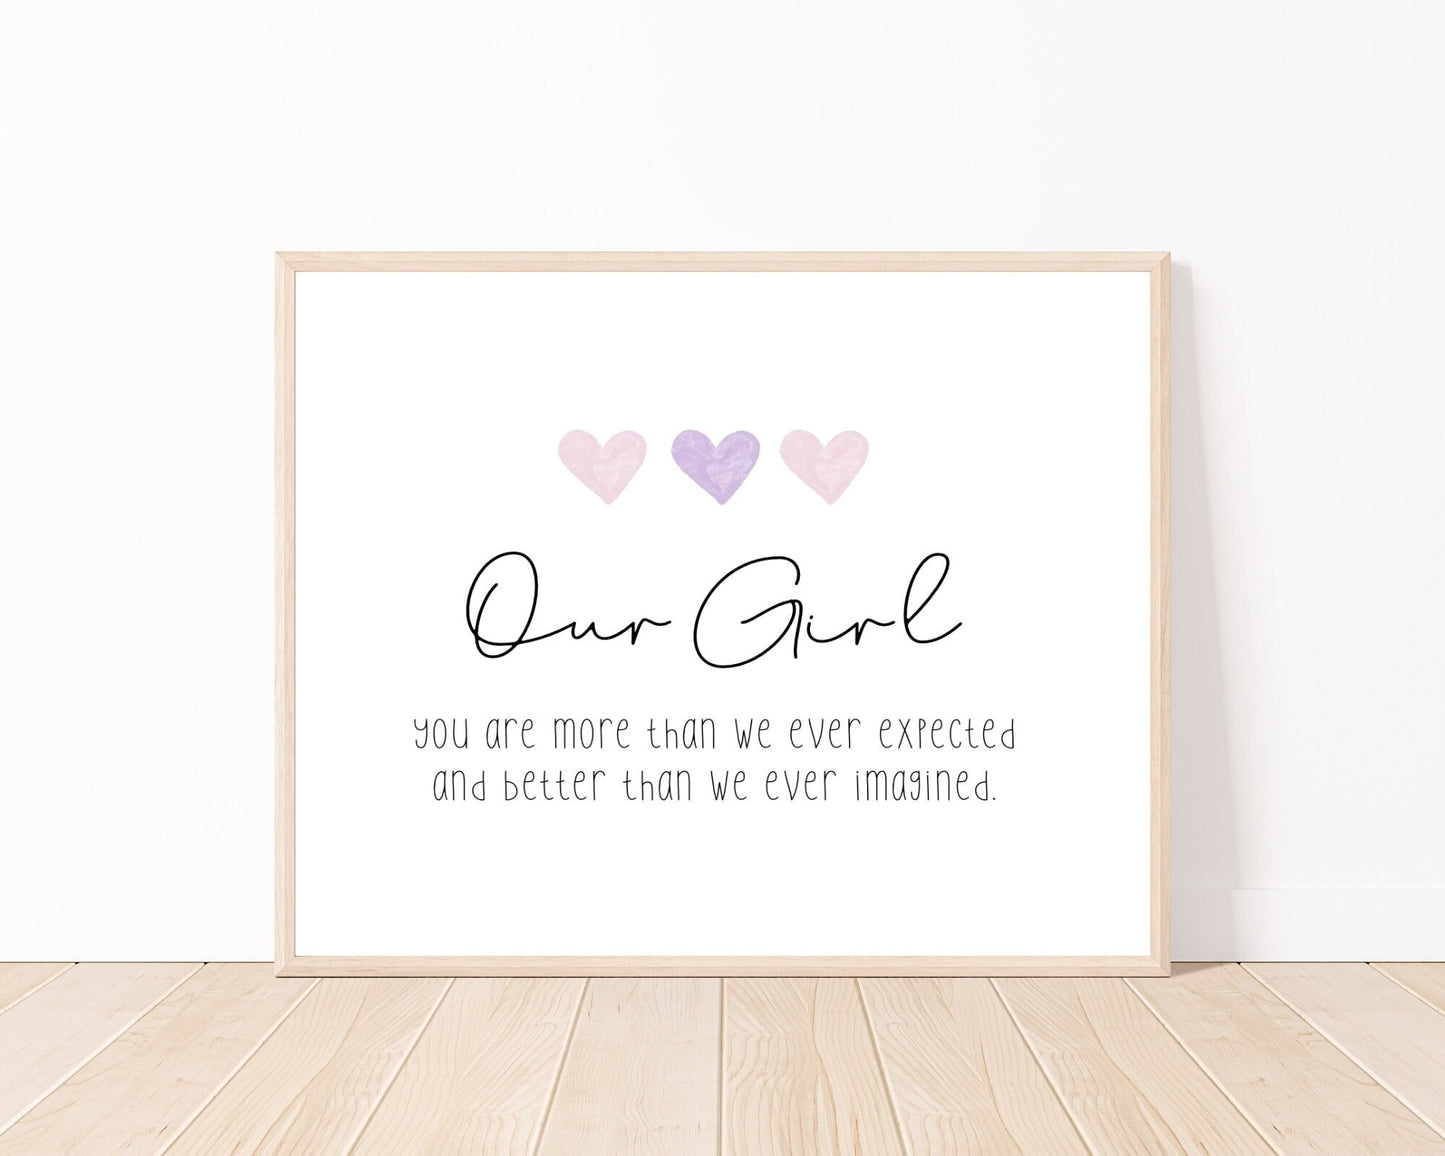 A little girl’s room digital print placed on a white wall and parquet flooring that has three hearts at the top, and a piece of writing that says: “Our girl, you are more than we ever expected and better than we ever imagined.”